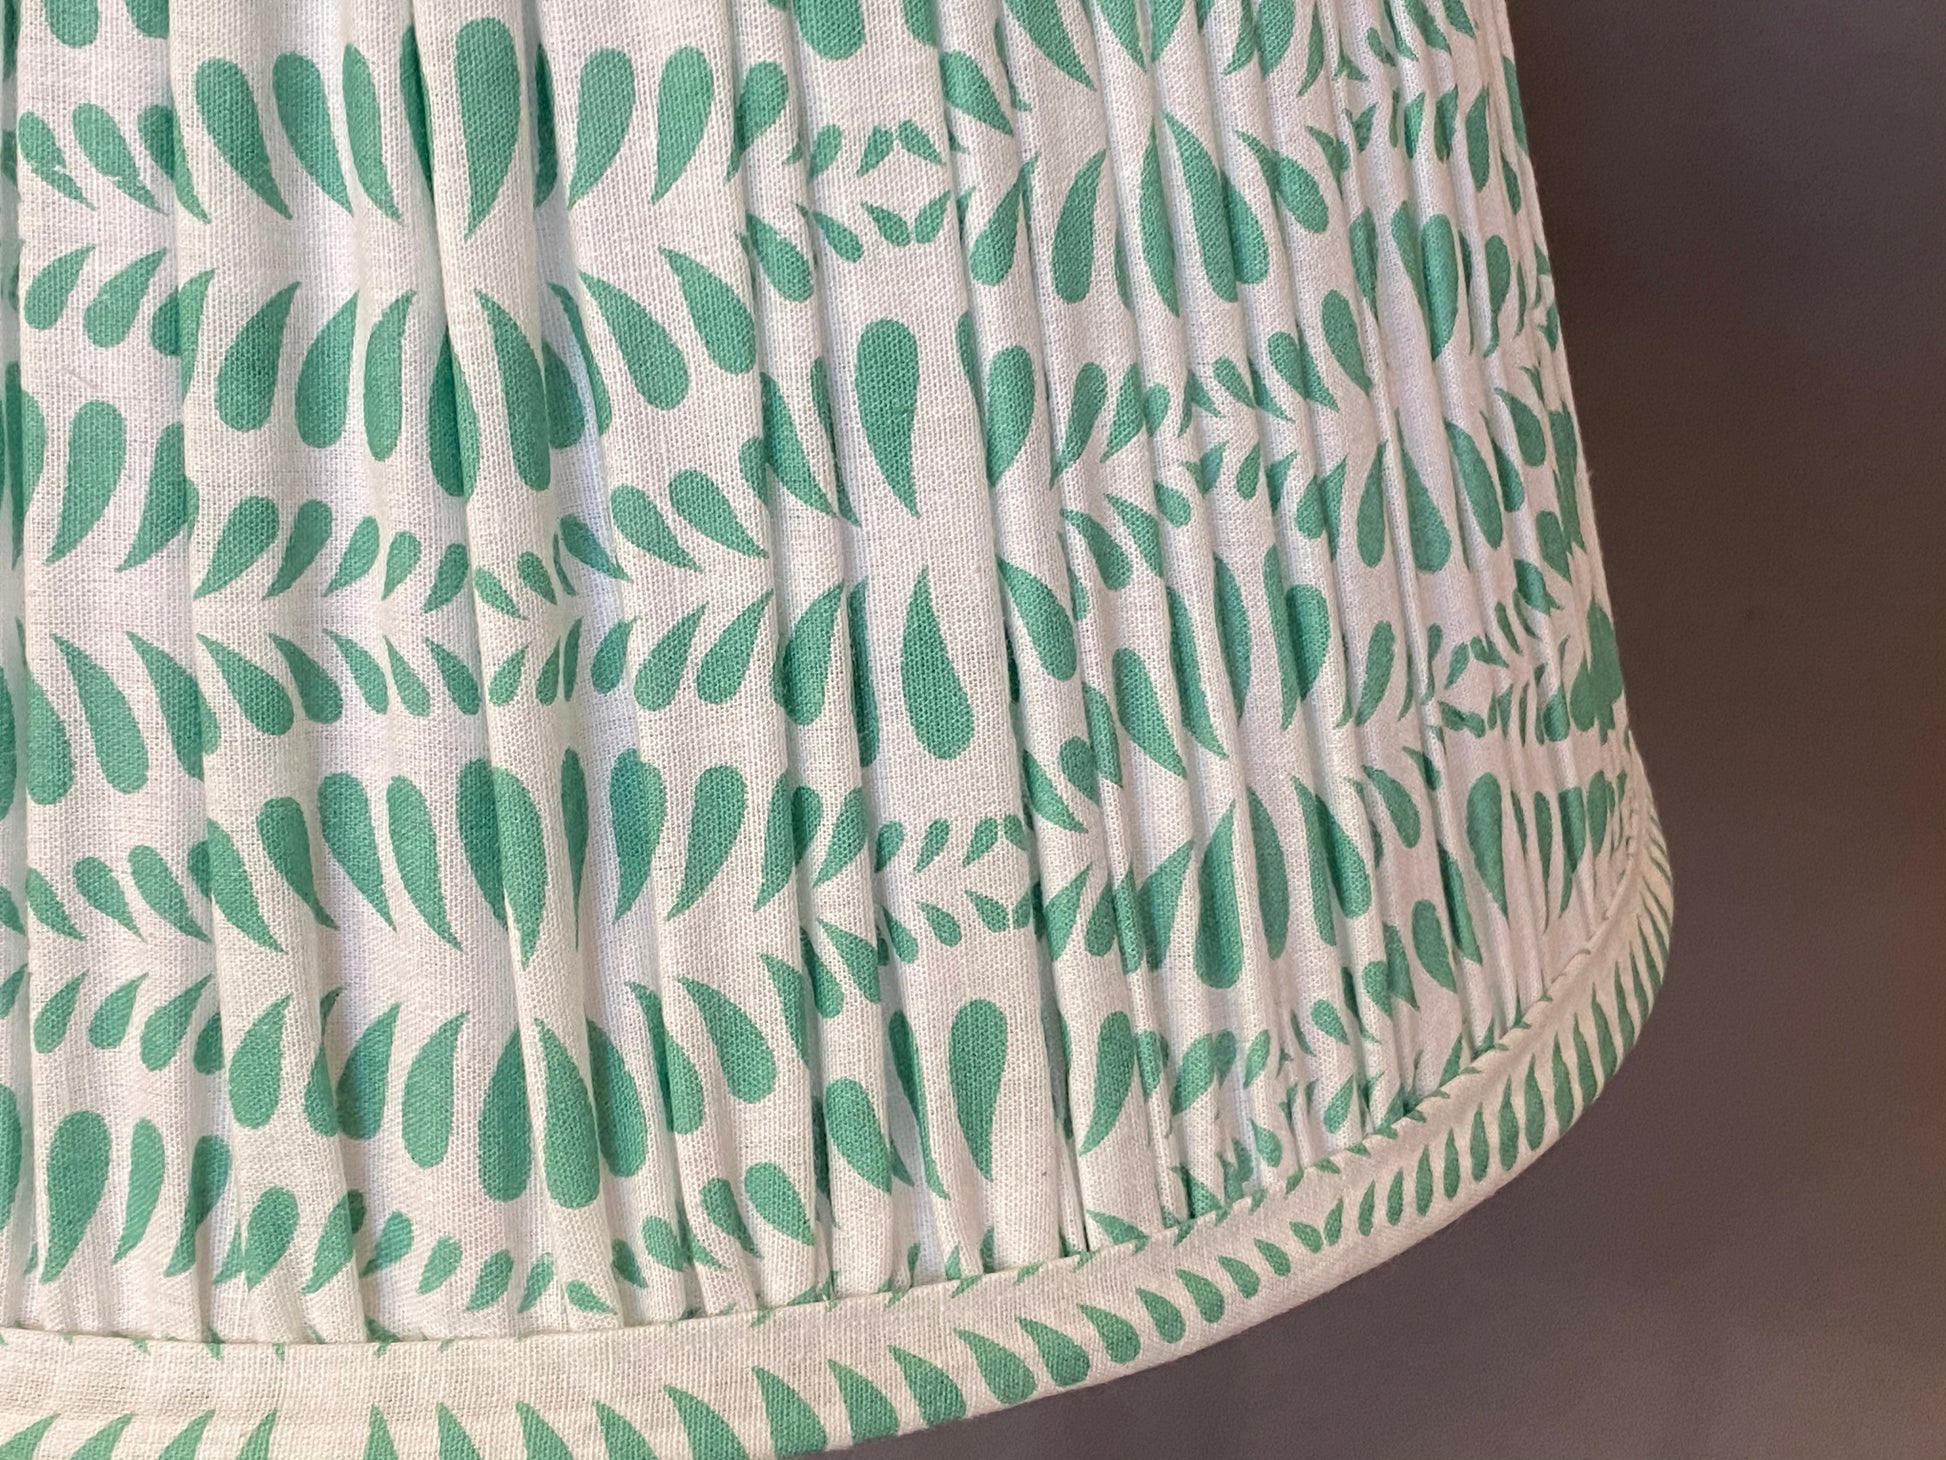 Green Bangla Cotton Lampshade close up on a grey background